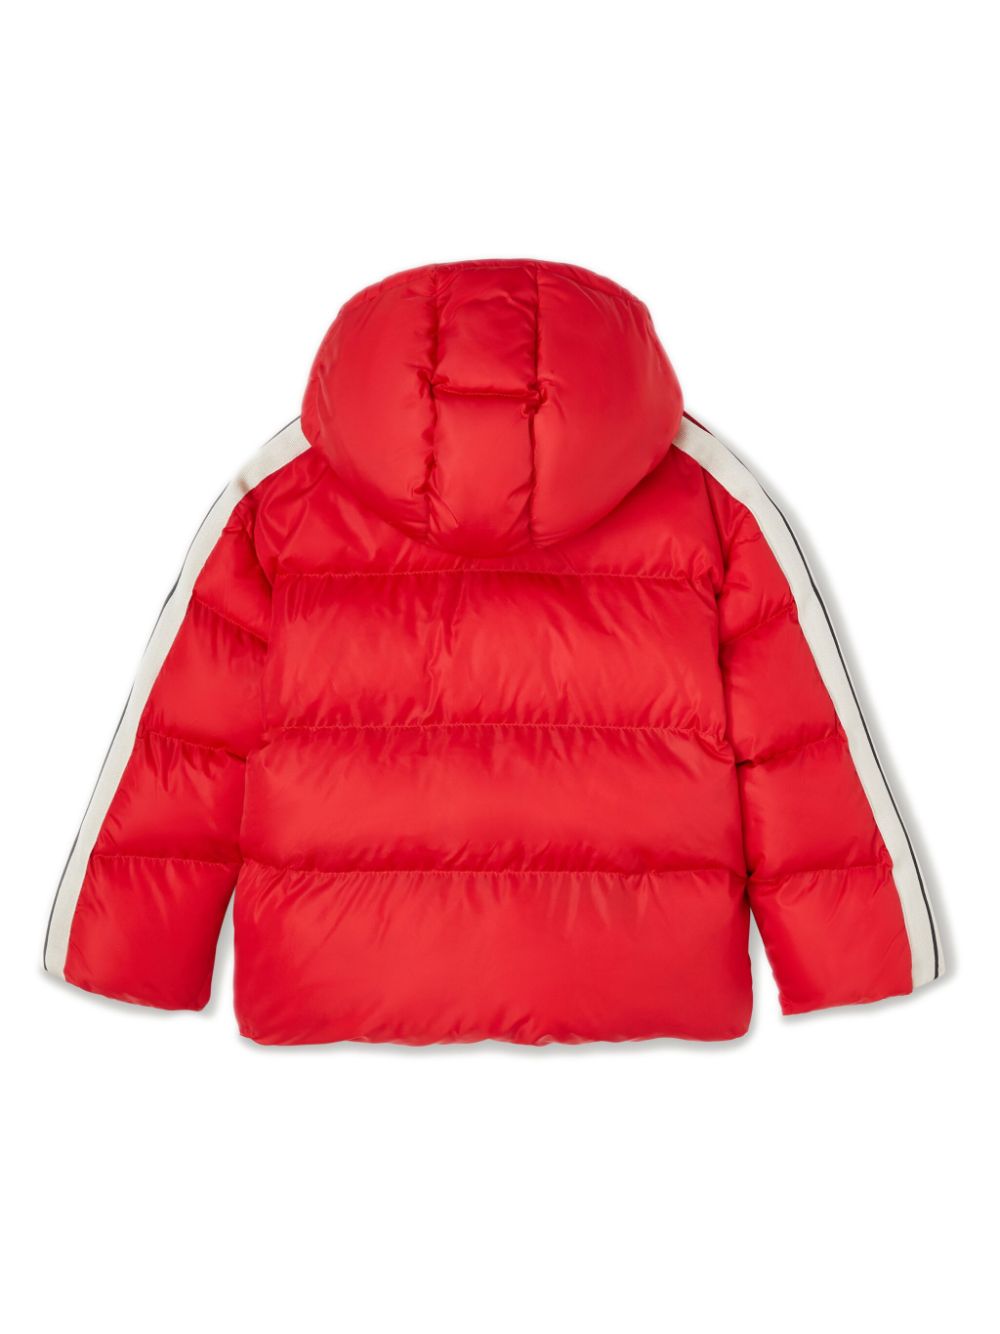 Red polyester jacket for children